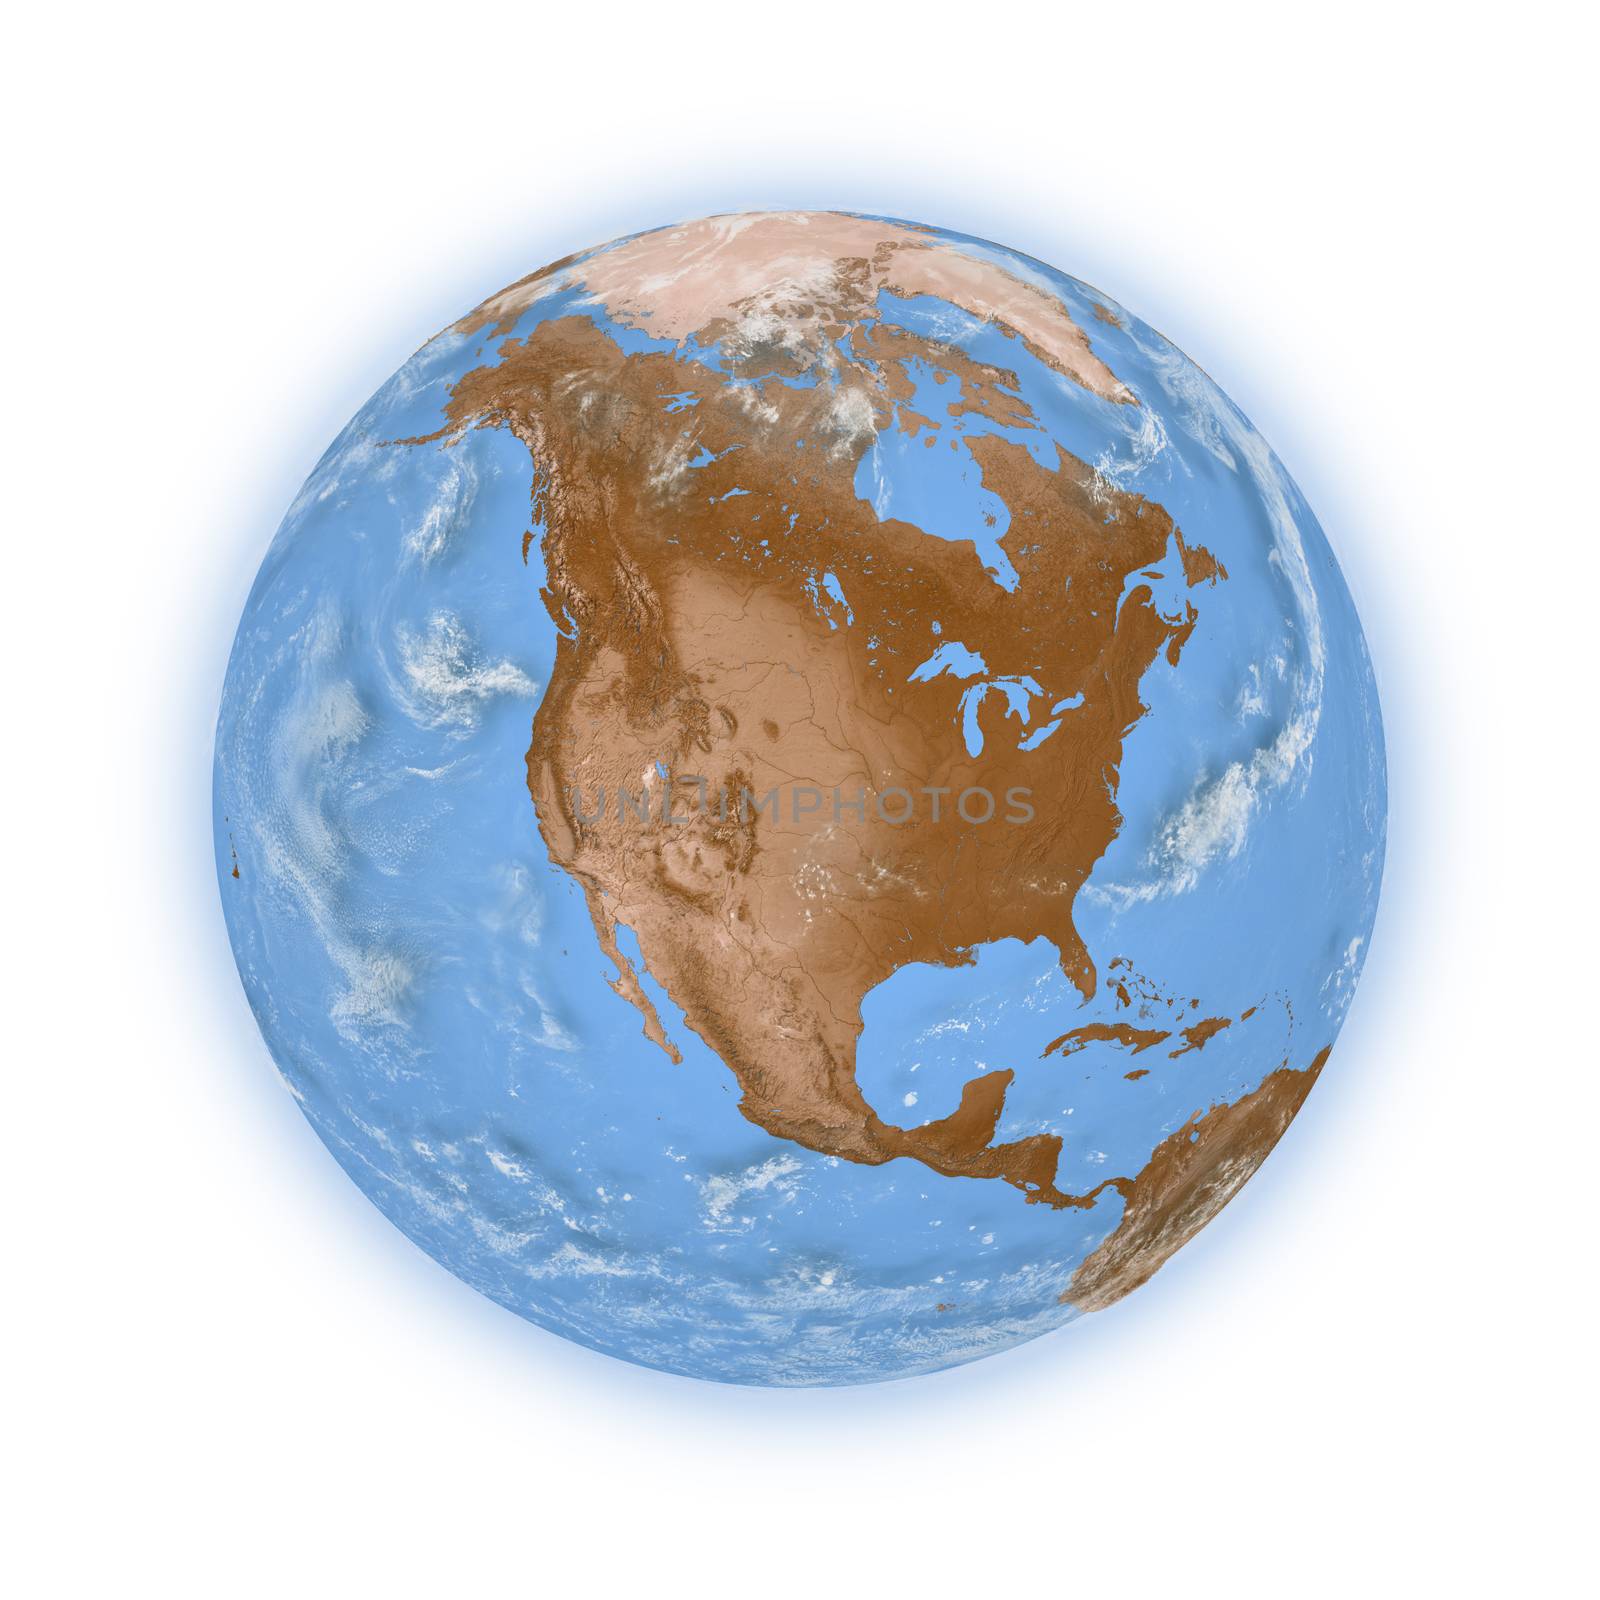 North America on planet Earth by Harvepino